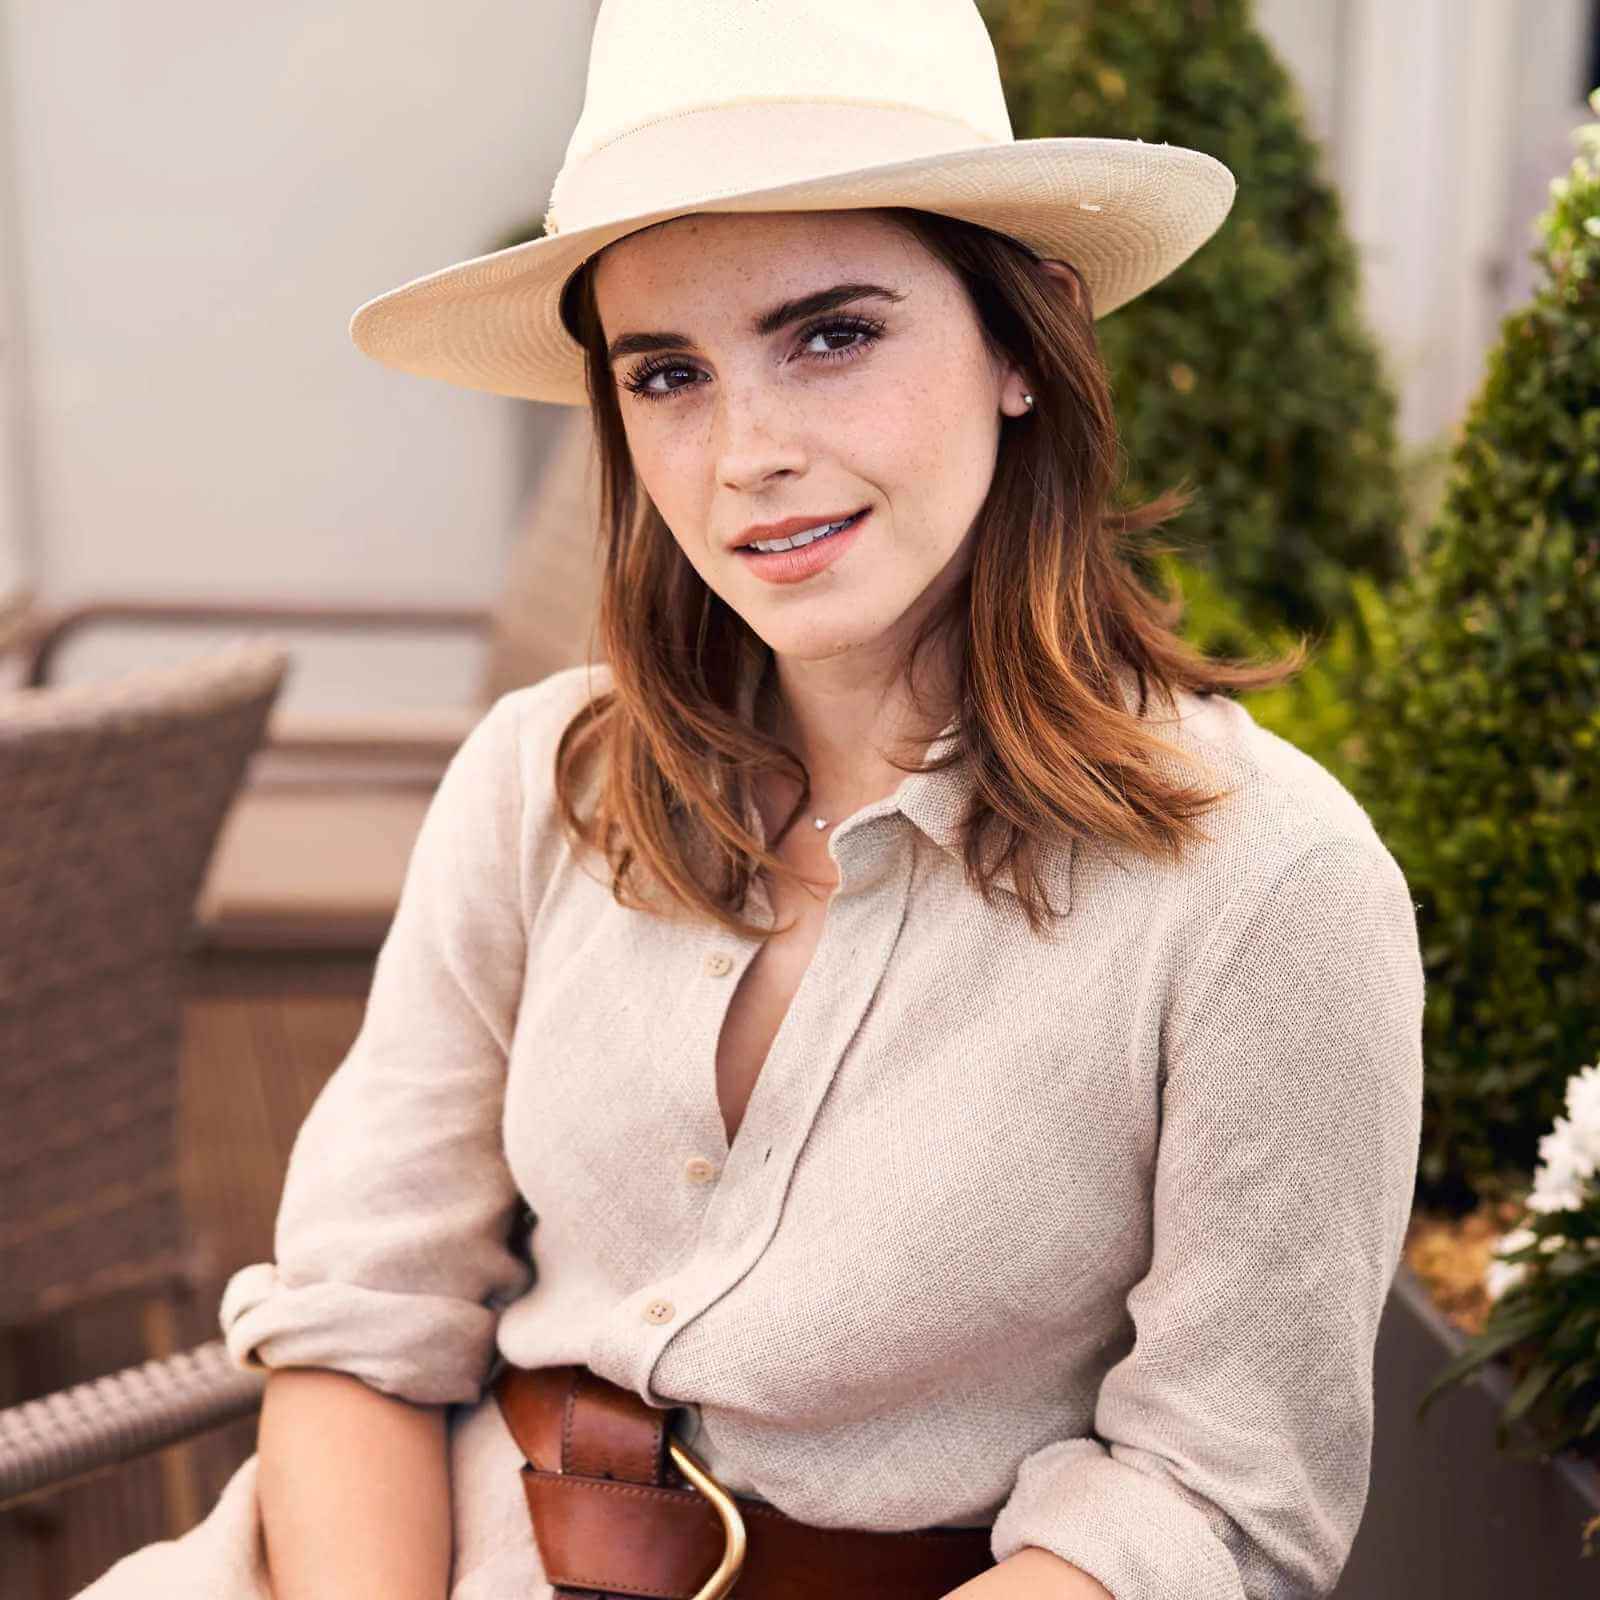 Emma Watson To Barbara Palvin: 3 Beige Looks You Loved The Most? 769686